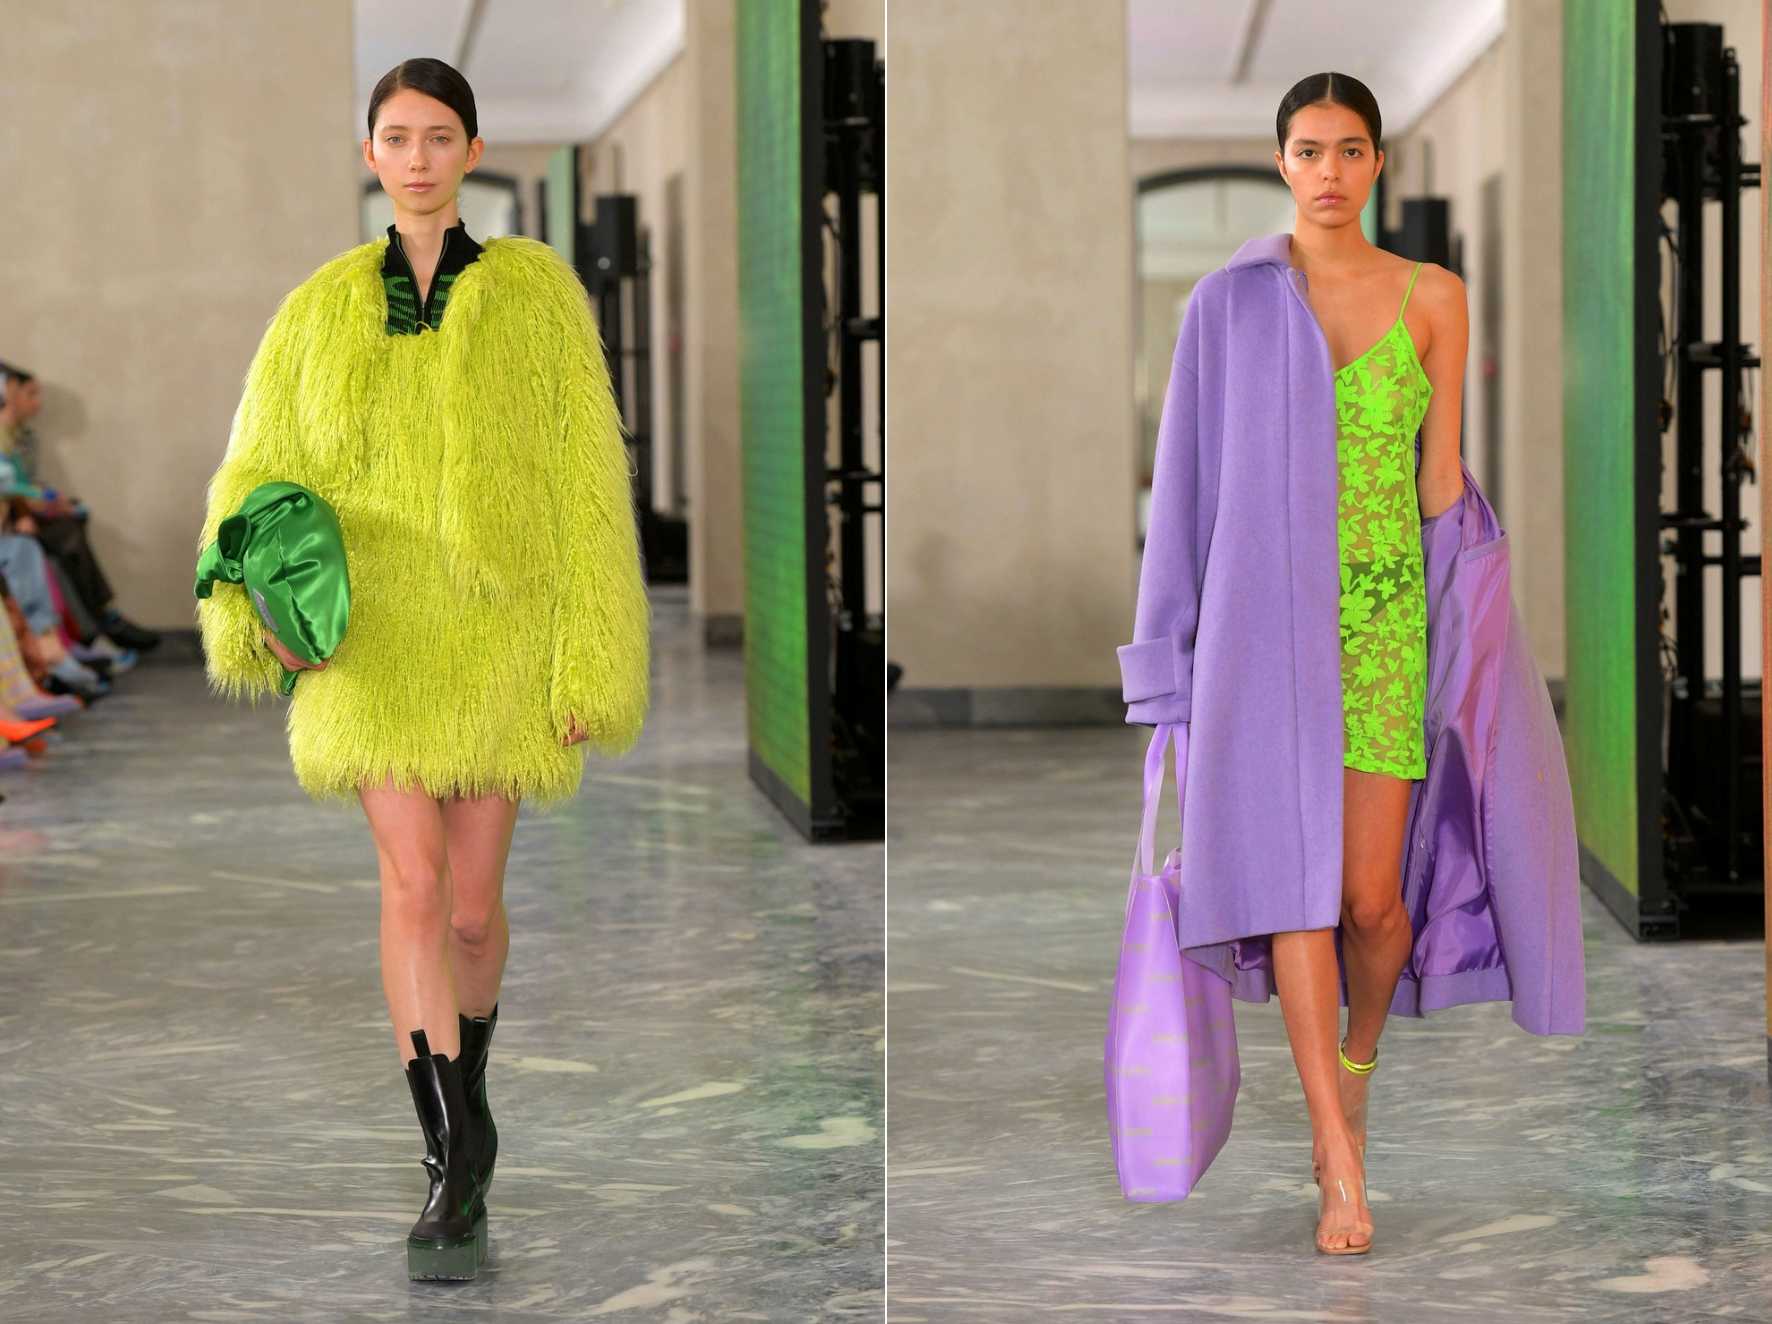 News Recap of the sustainable fashion week highlights